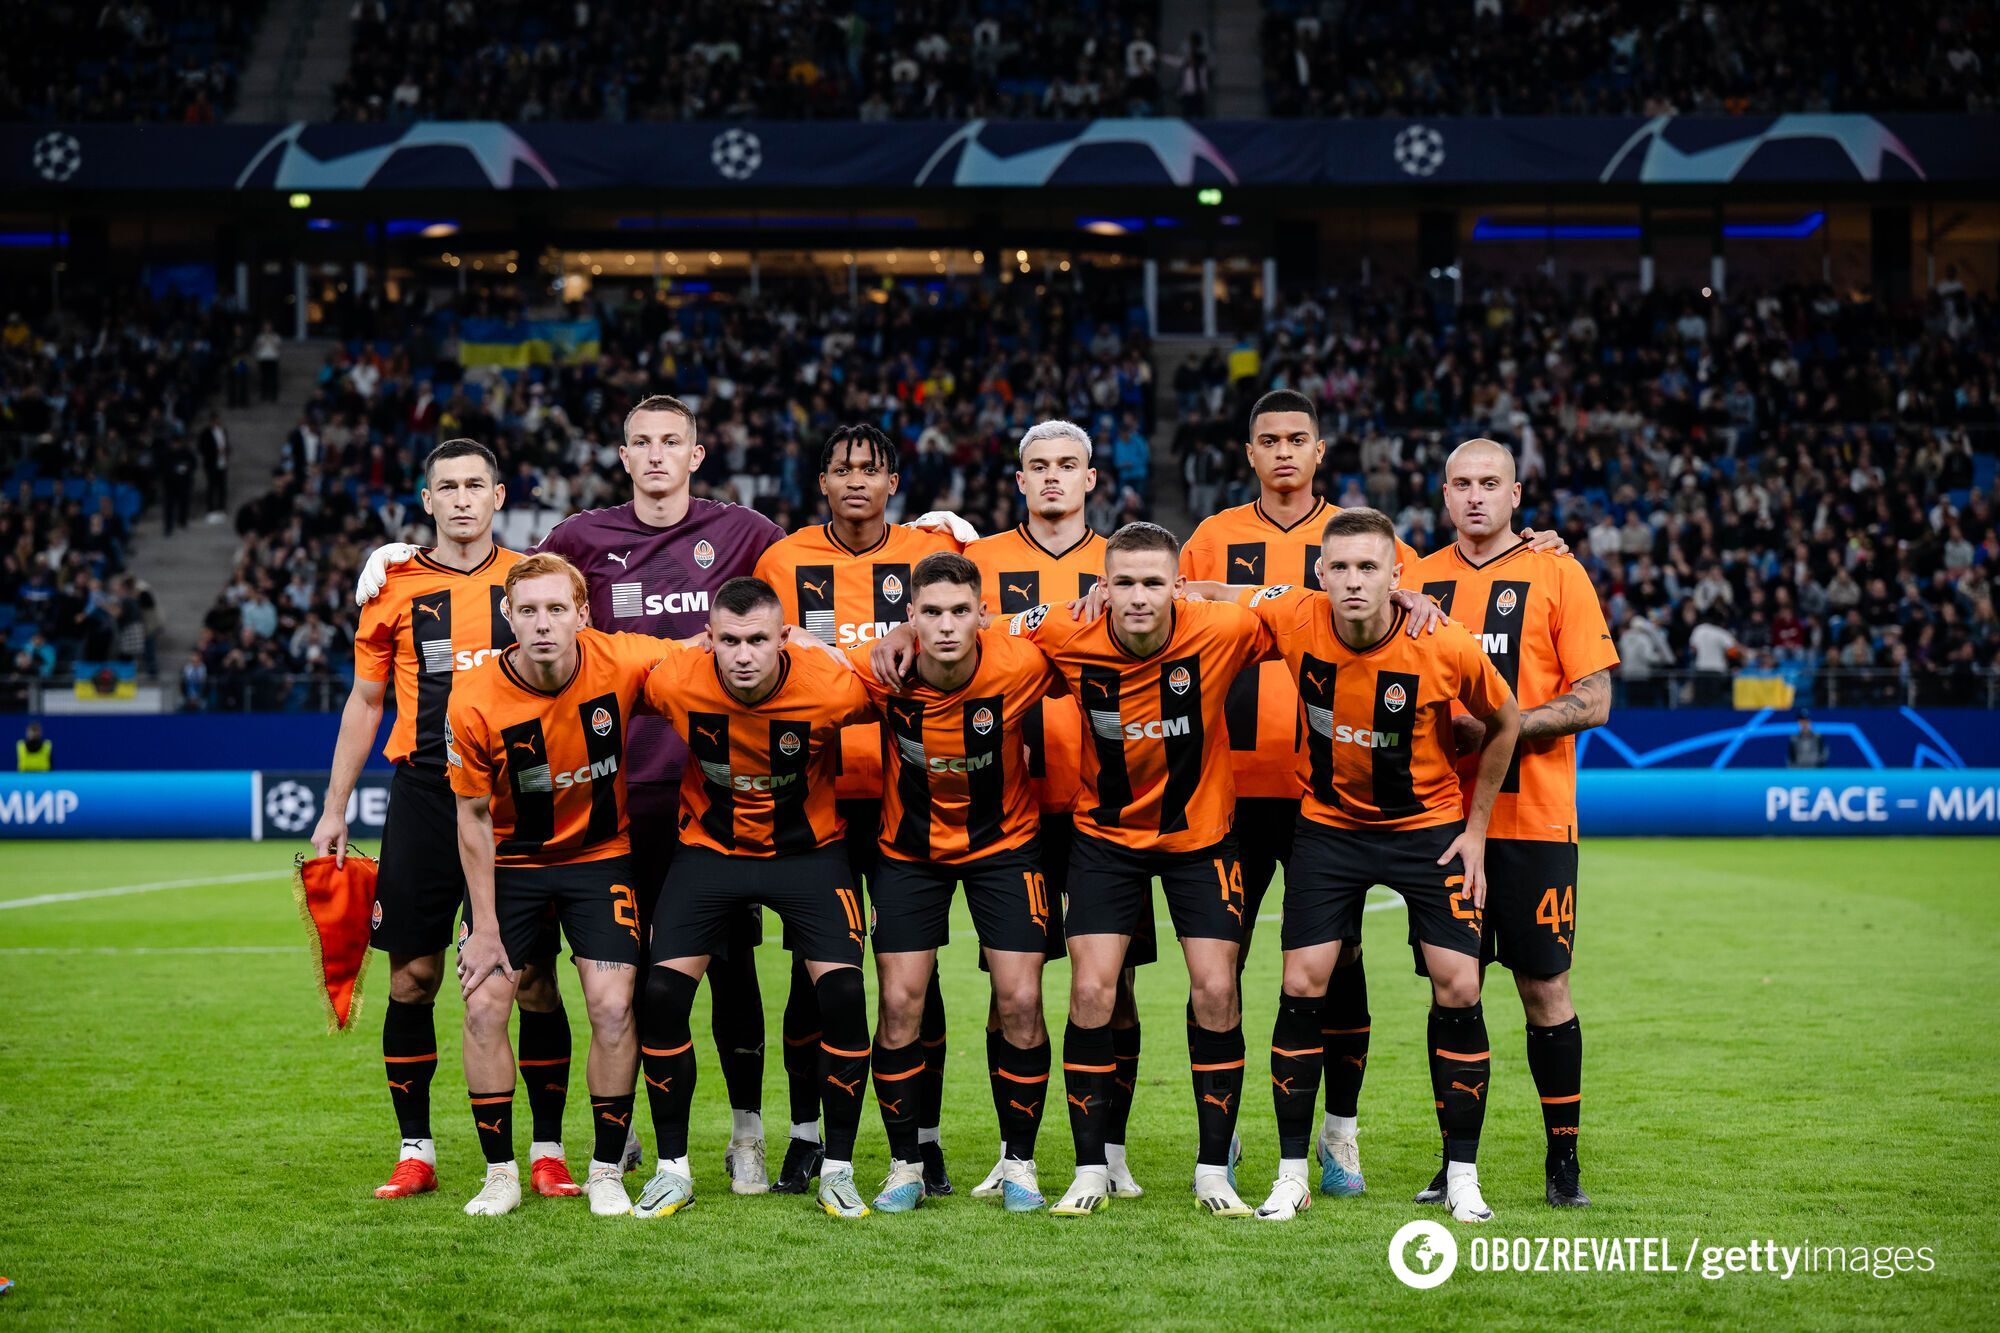 UEFA suspends Russian representative from Shakhtar's Champions League match